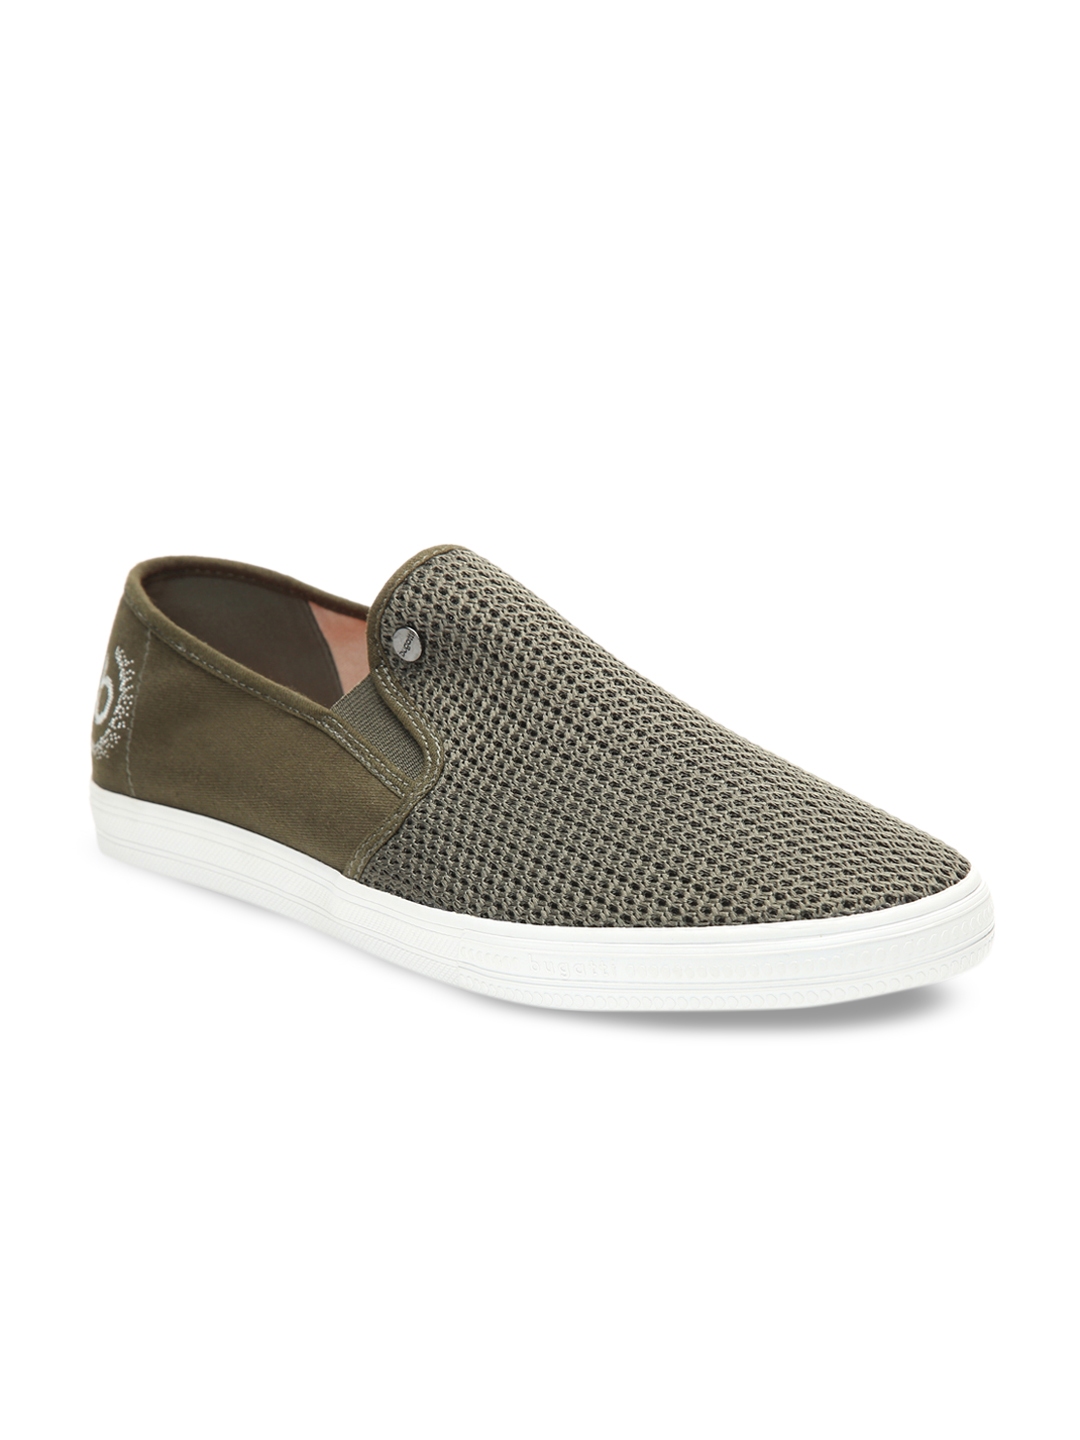 Buy Bugatti Men Olive Green Slip On Sneakers - Casual Shoes for Men ...